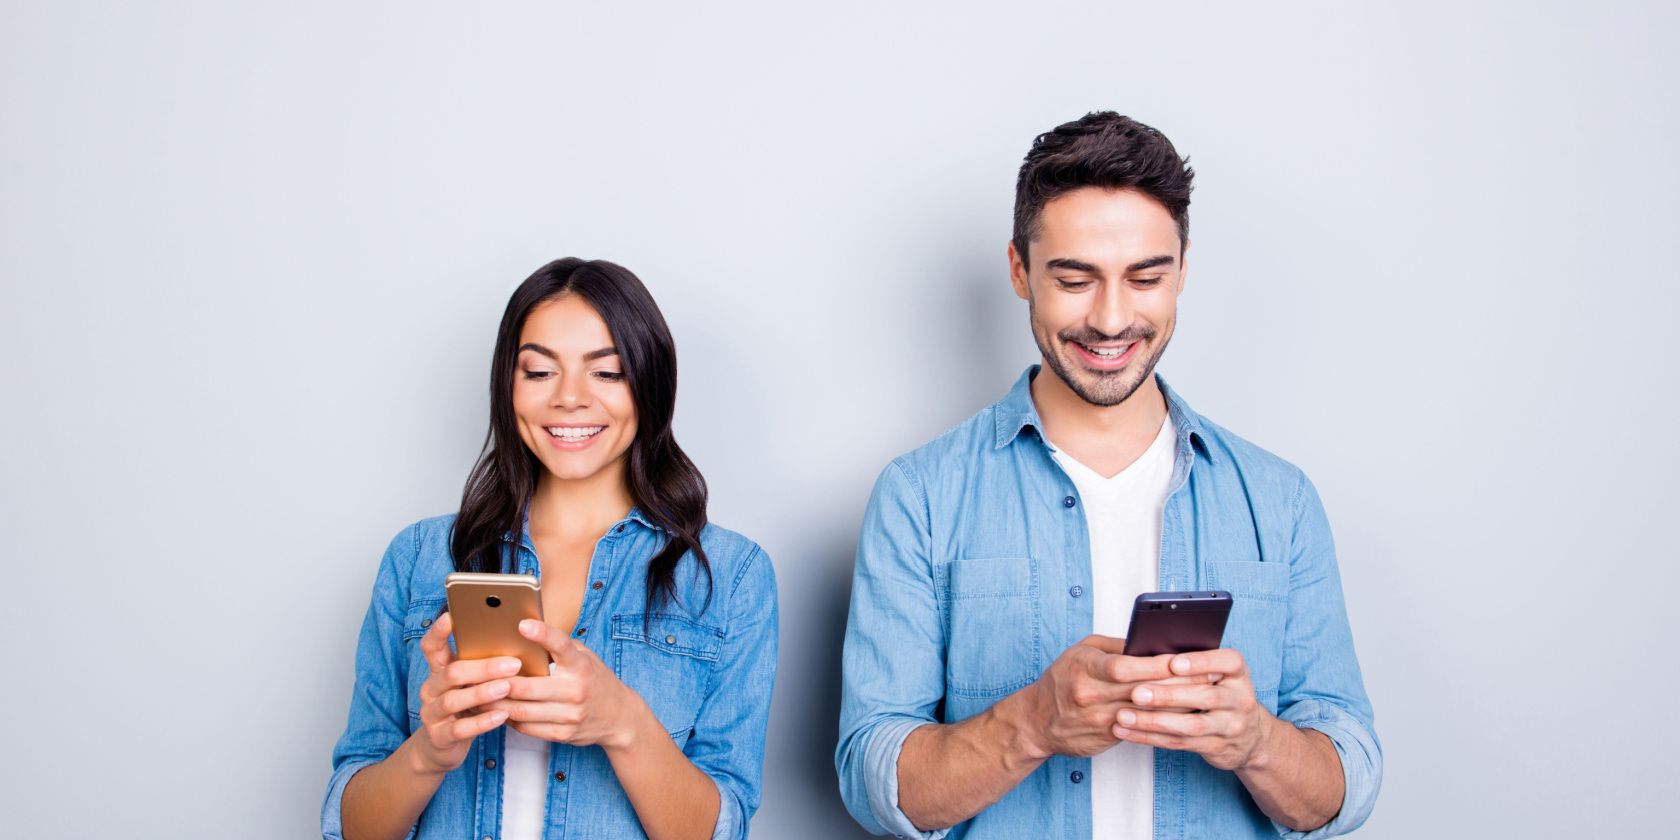 Happy woman and man using smartphones